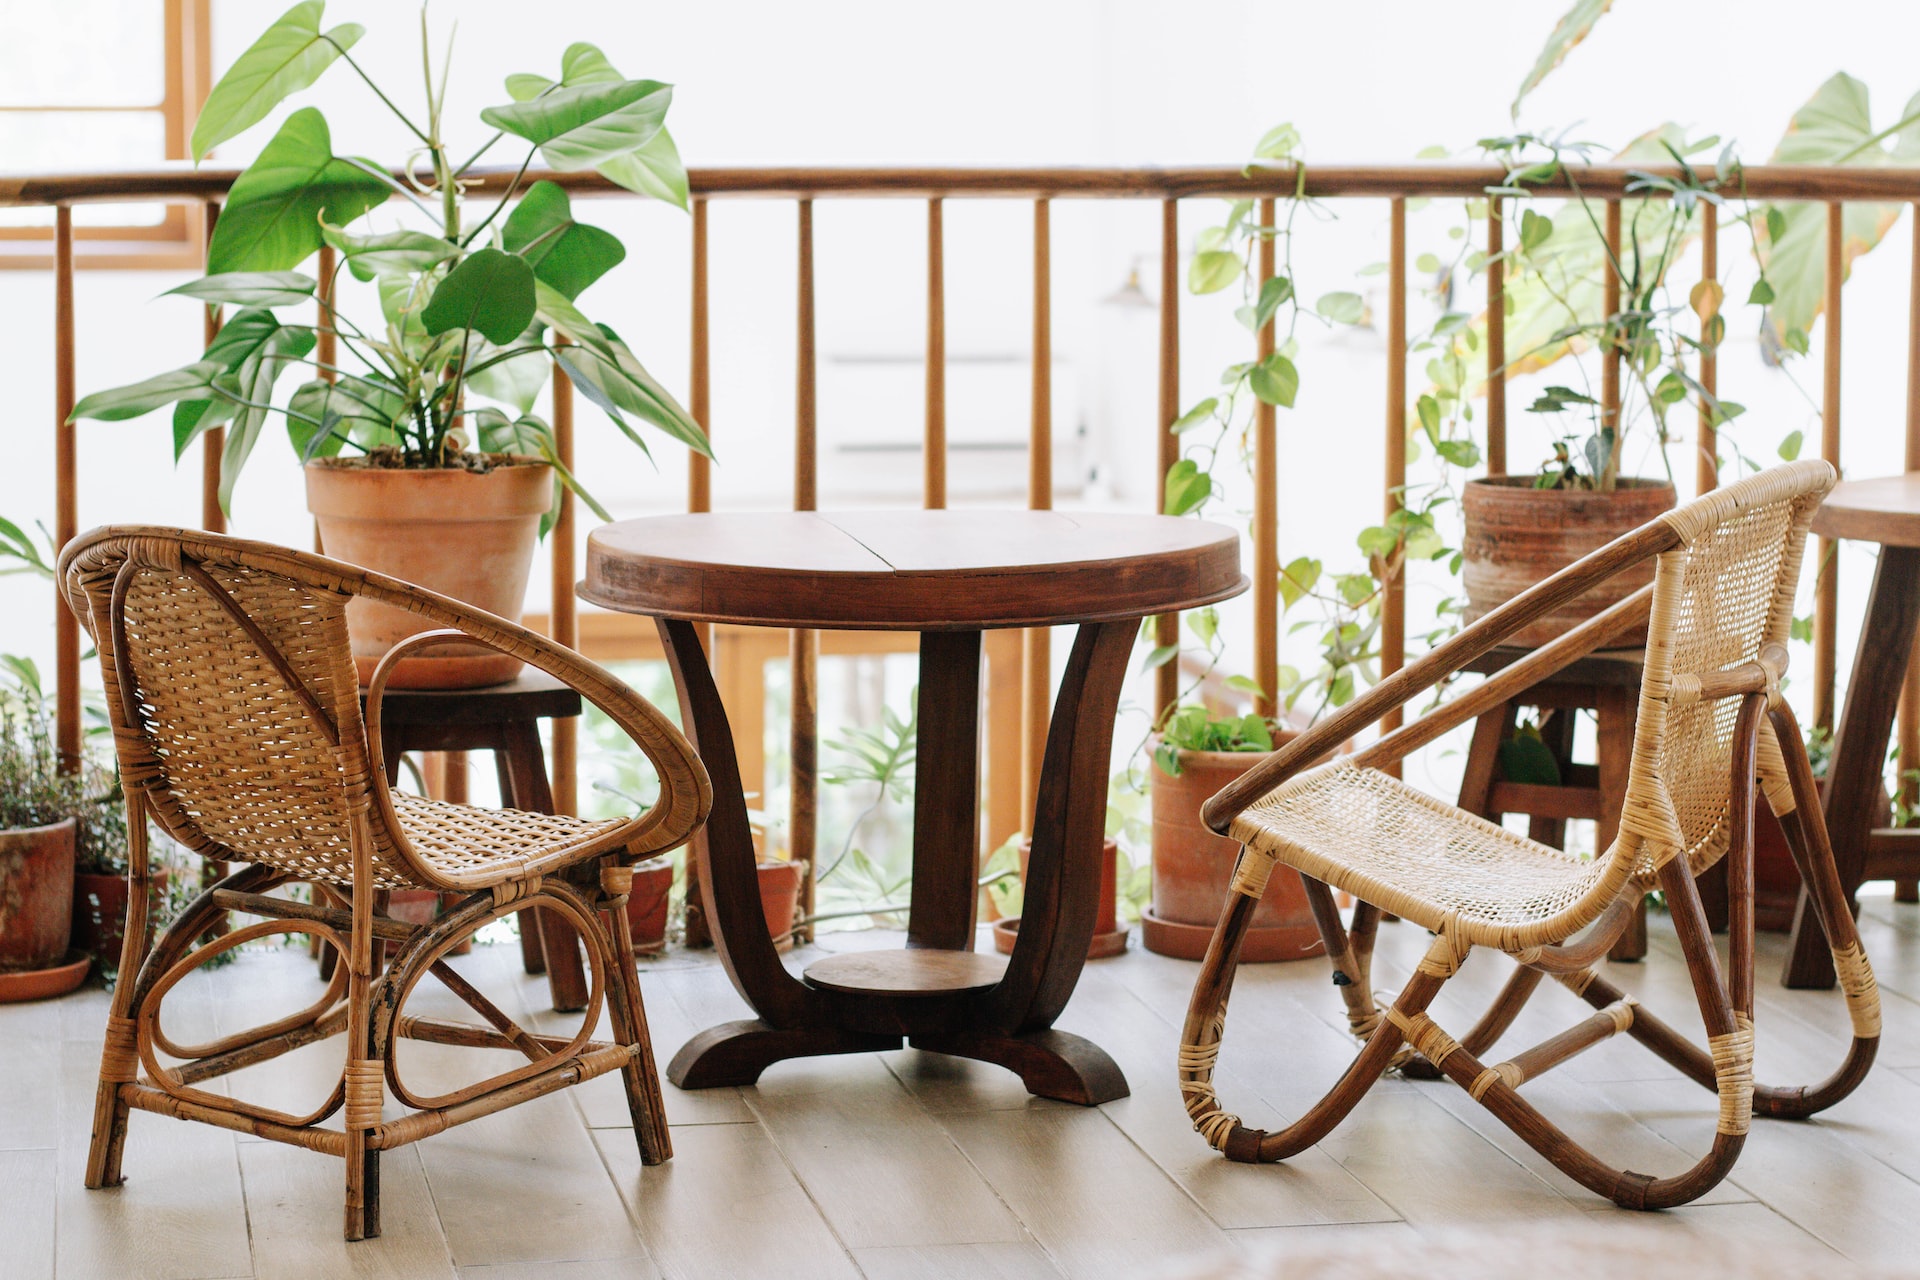 4 creative ideas for decorating your balcony